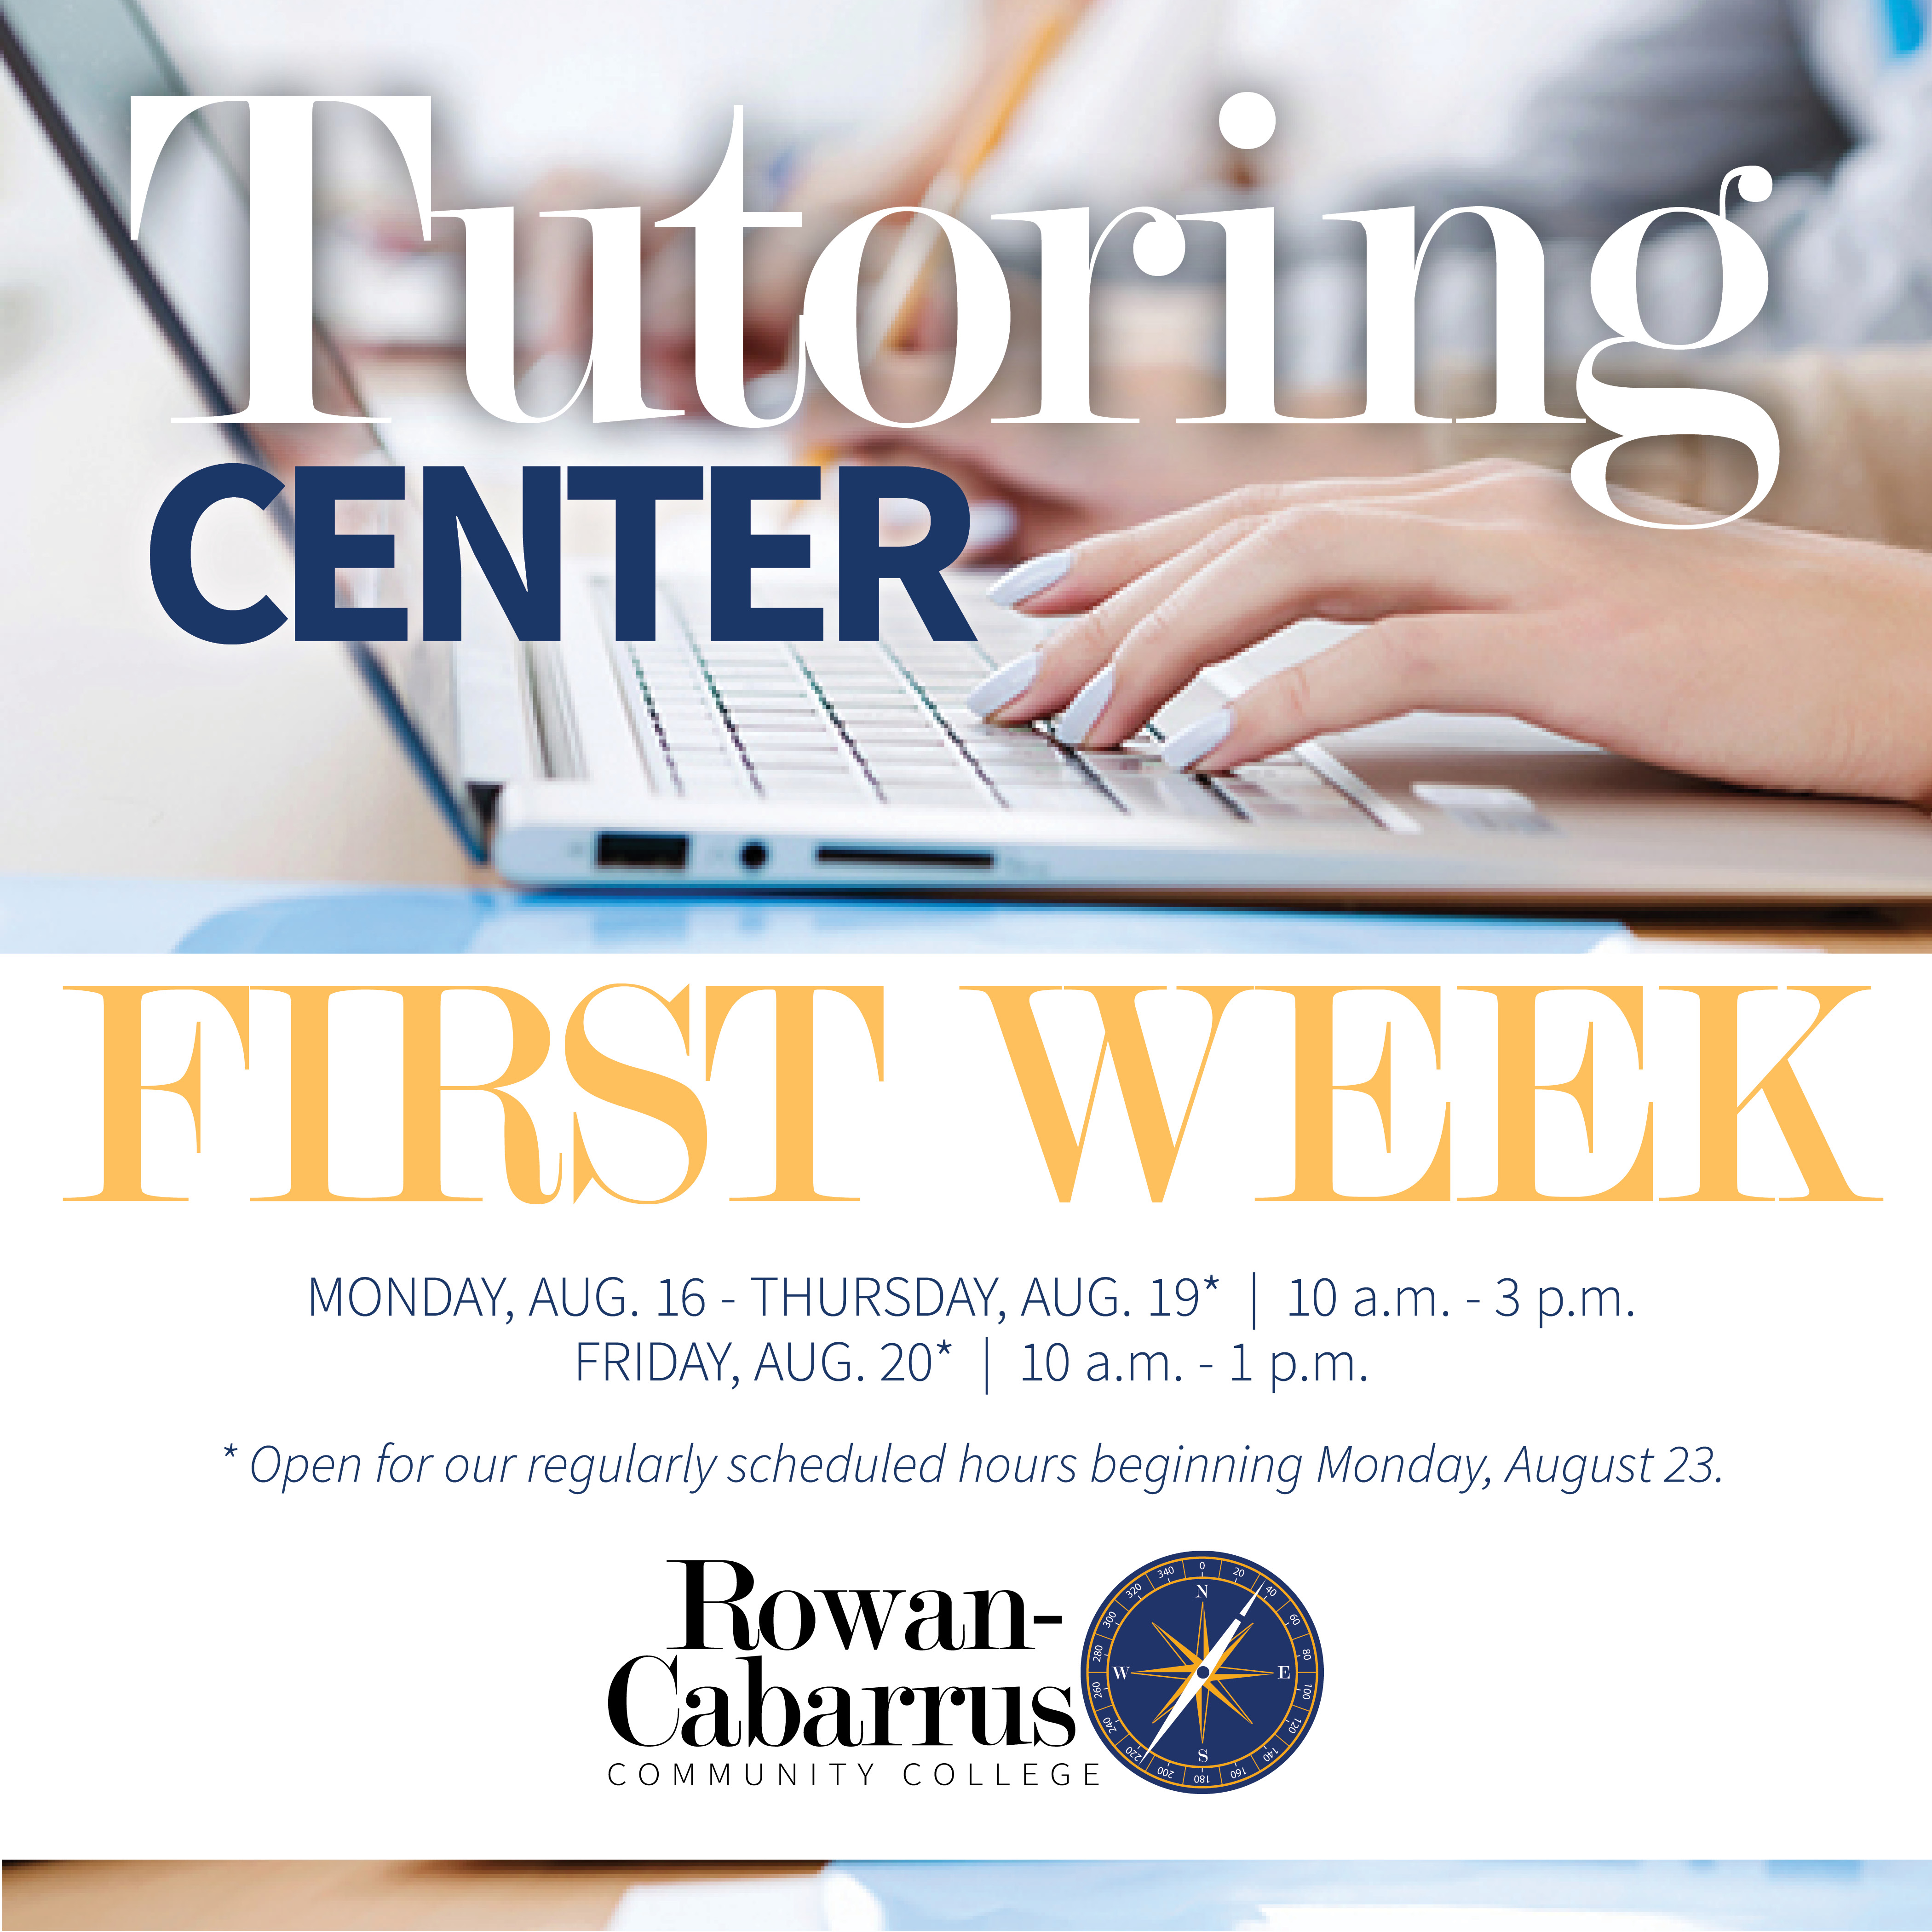 Image of a person typing. Gives the dates and hours of the Tutoring Center's First Week Schedule for the week beginning August 16th. . Monday through Thursday 10 a.m. - 3 p.m. and Friday 10 a.m.-1 p.m.